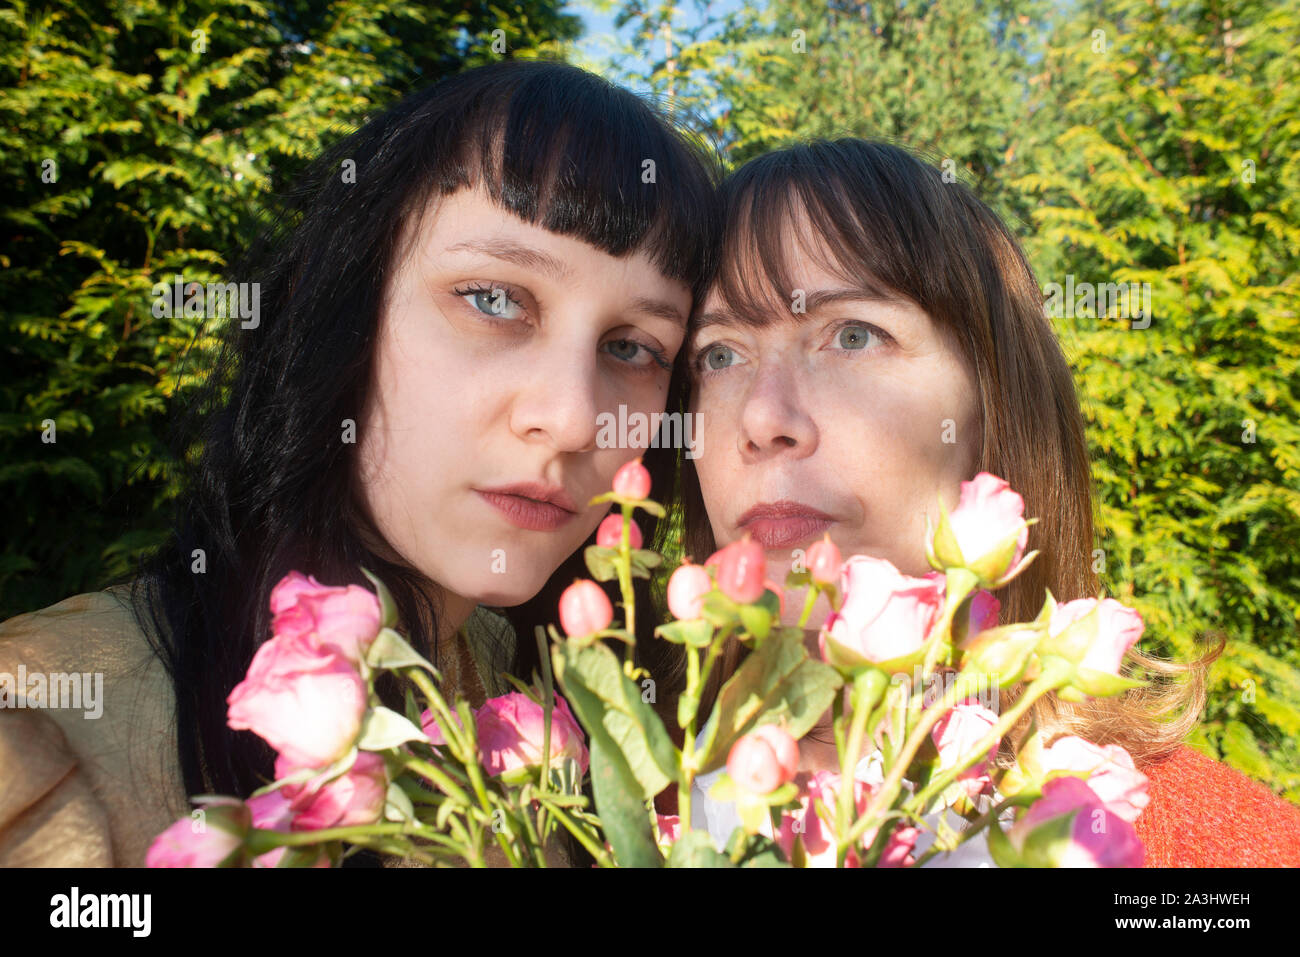 Head and Shoulders Portrait of Two Women, Heads Touching, with Bouquet of Flowers Stock Photo